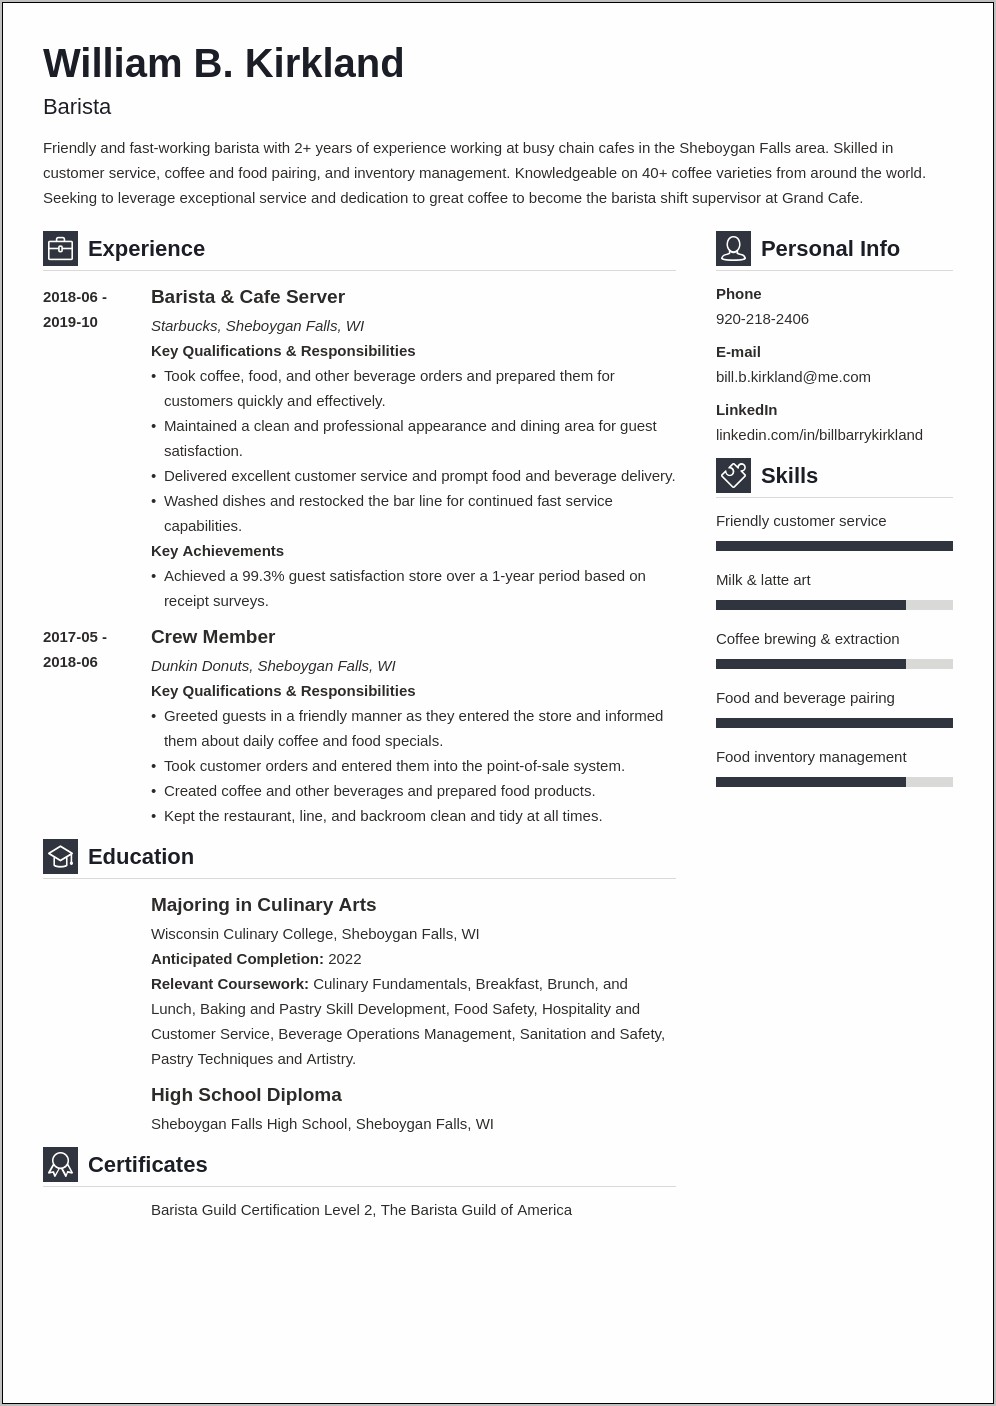 Bullet Points In Resume Examples